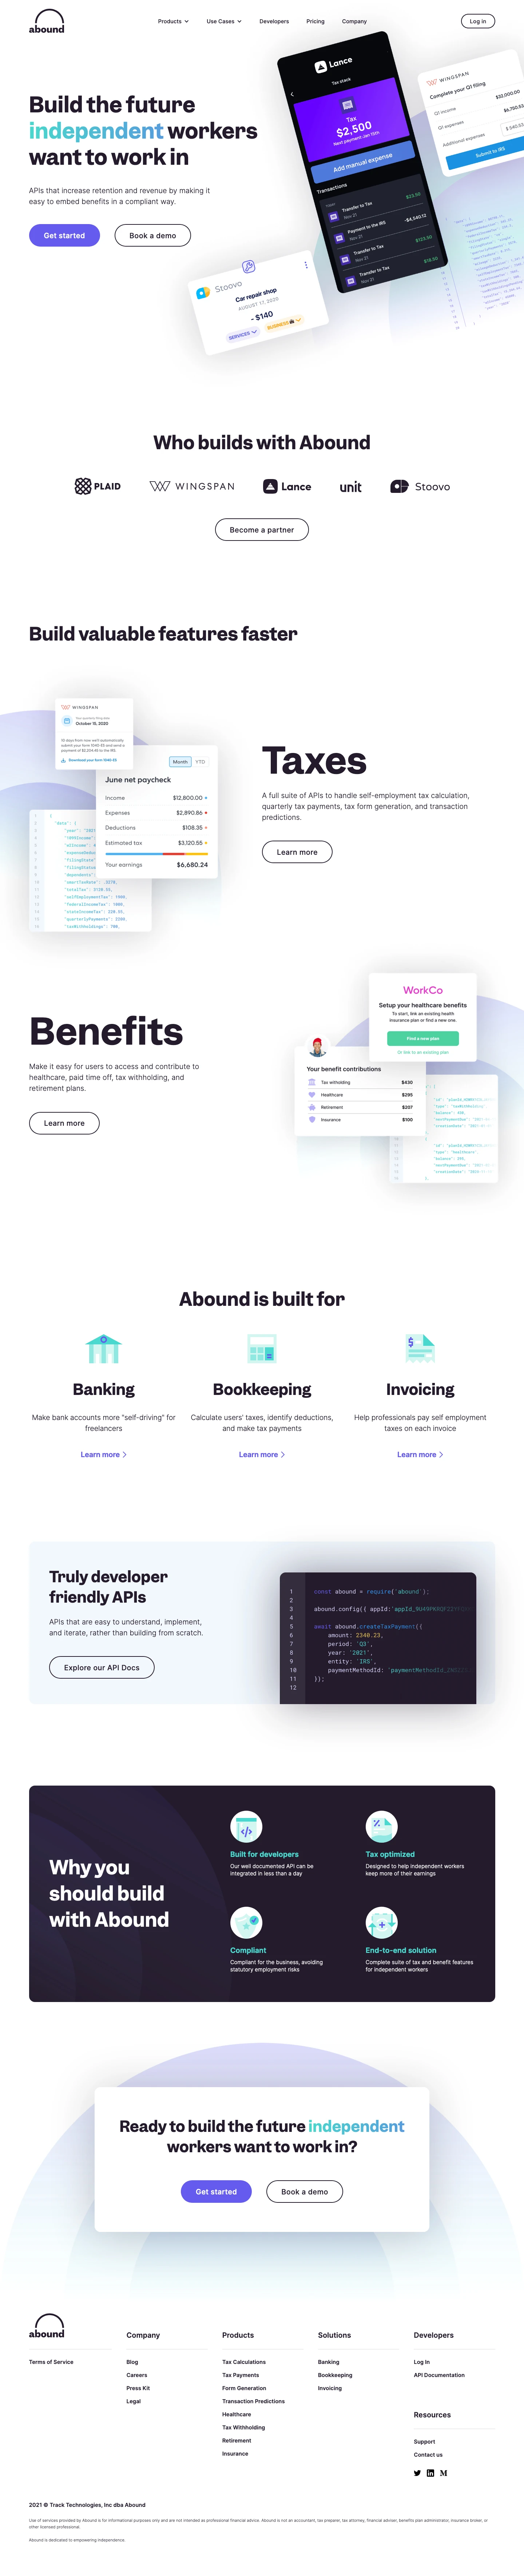 Abound Landing Page Example: Build the future independent workers want to work in. APIs that increase retention and revenue by making it easy to embed benefits in a compliant way.